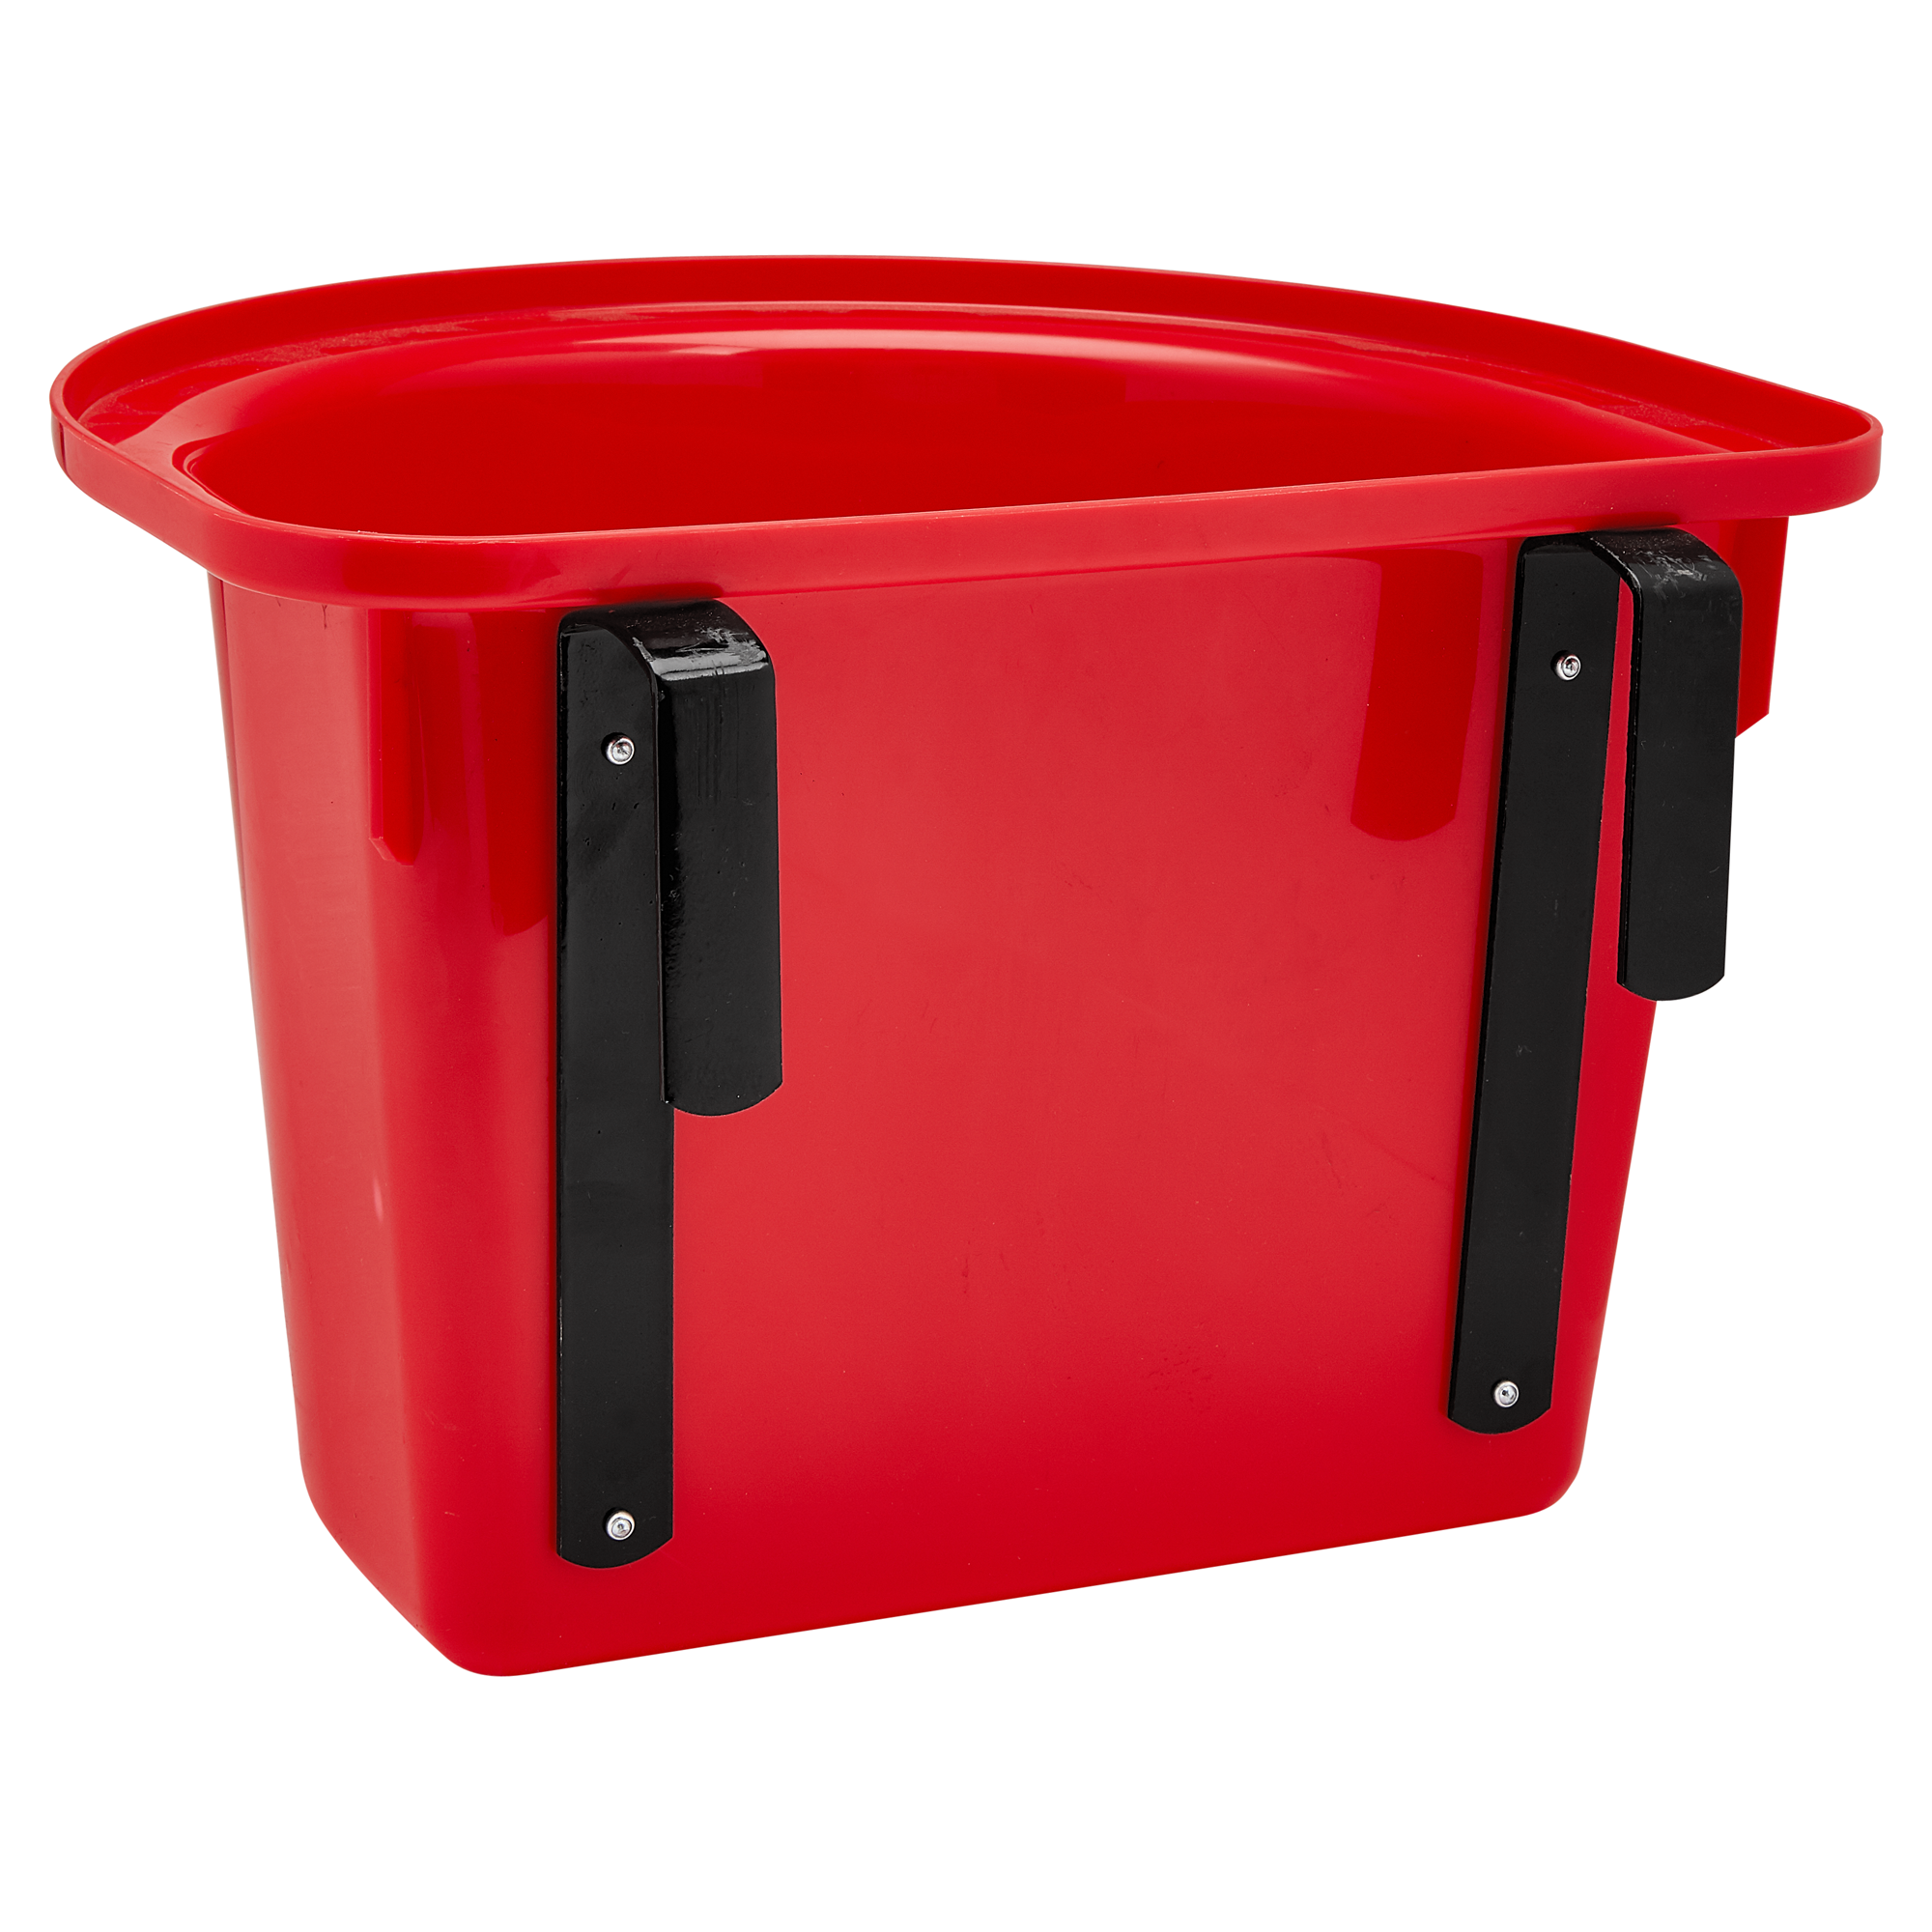 Transportkrippe Kunststoff 39 x 26 x 32,5 cm 12 l rot + product picture